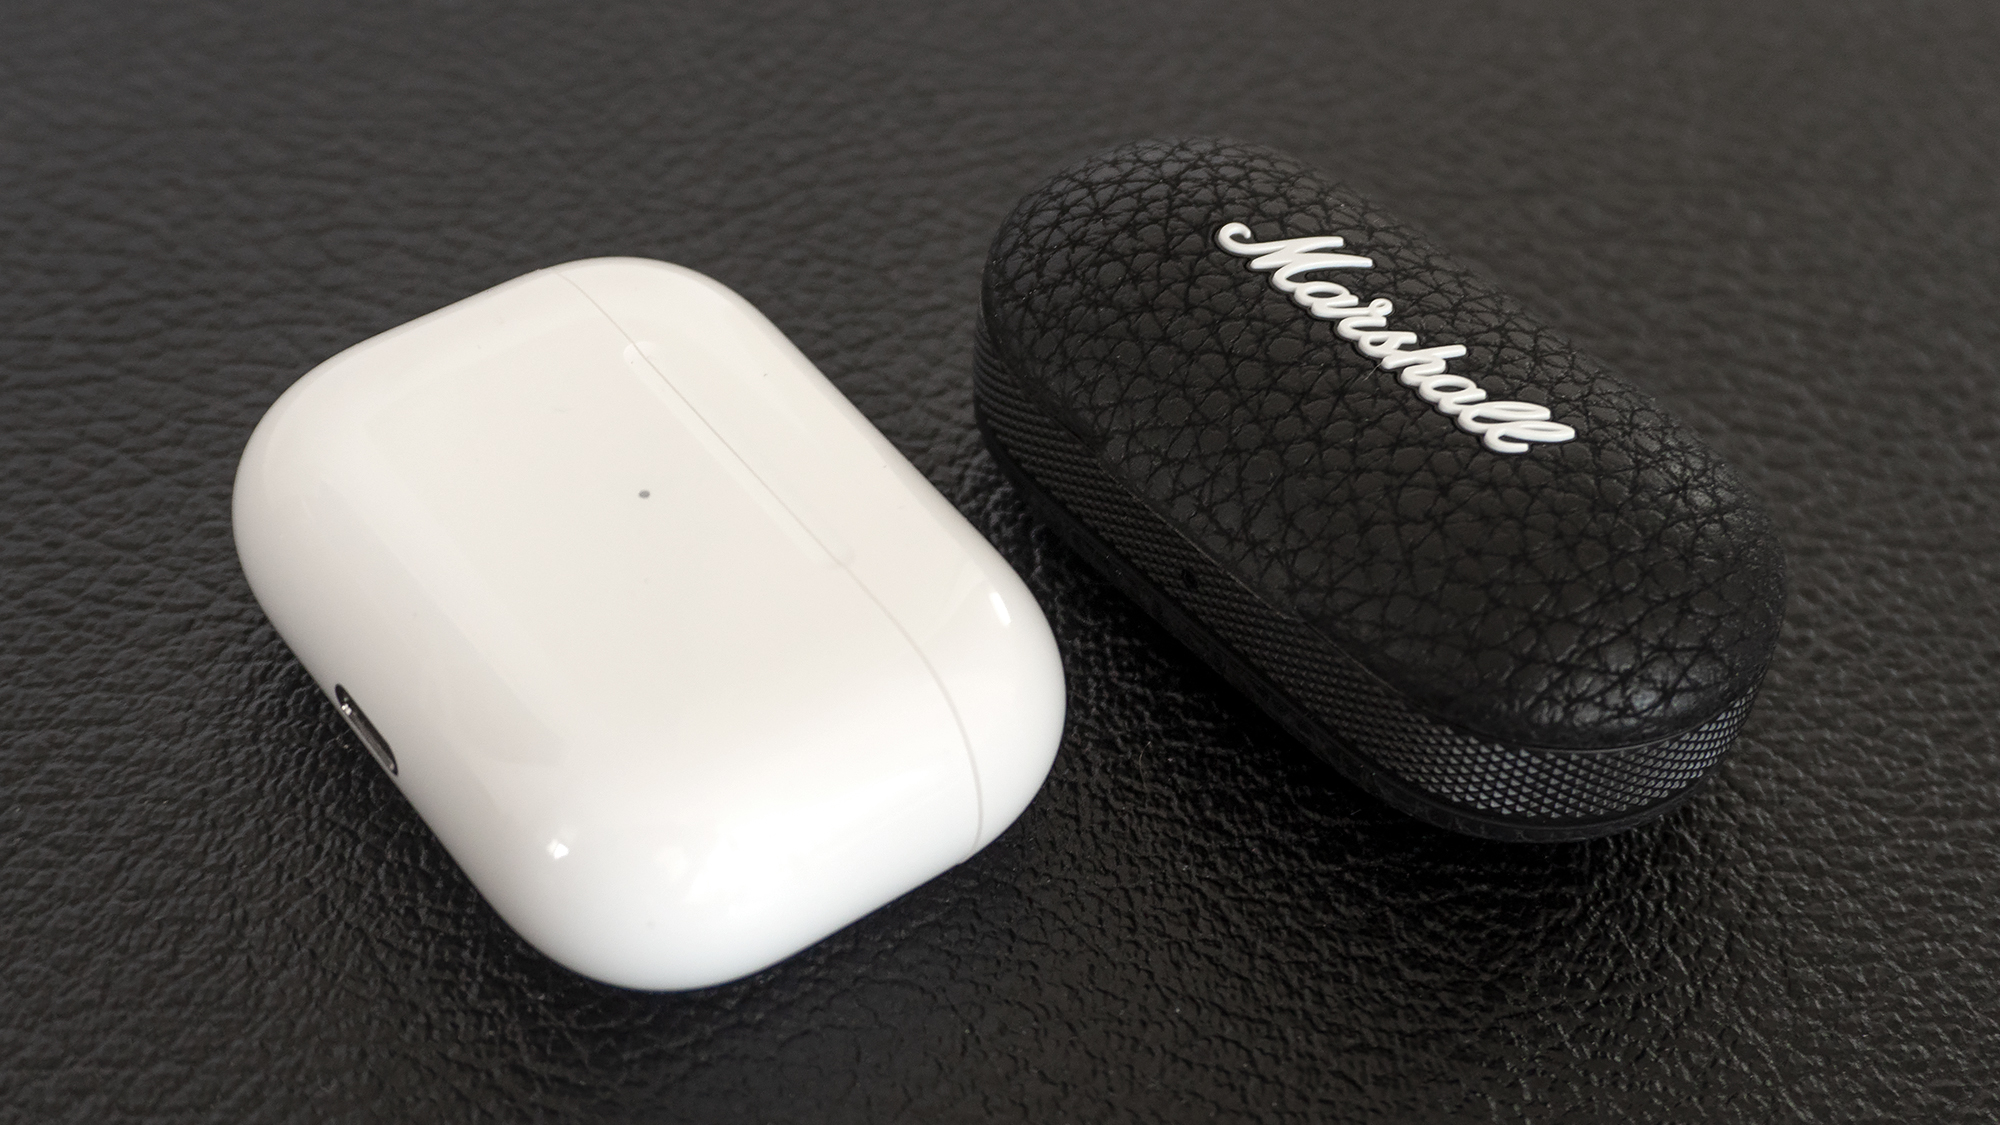 It's a toss-up between the AirPods Pro (left) and the Marshall Mode II (right) as to which set of wireless earbuds has the smaller charging case. (Photo: Andrew Liszewski - Gizmodo)